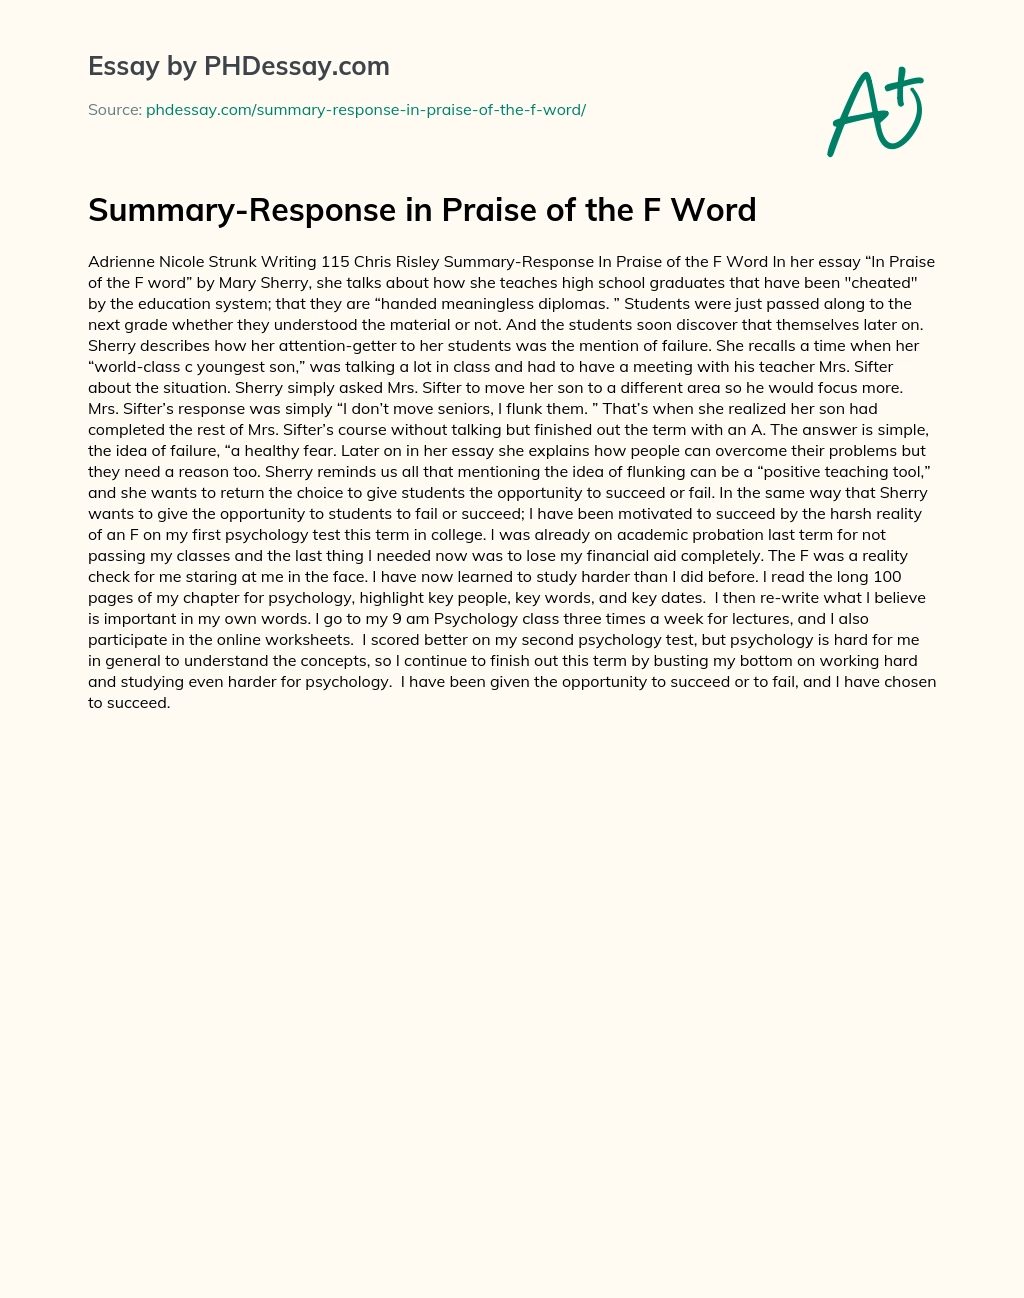 Summary-Response in Praise of the F Word essay